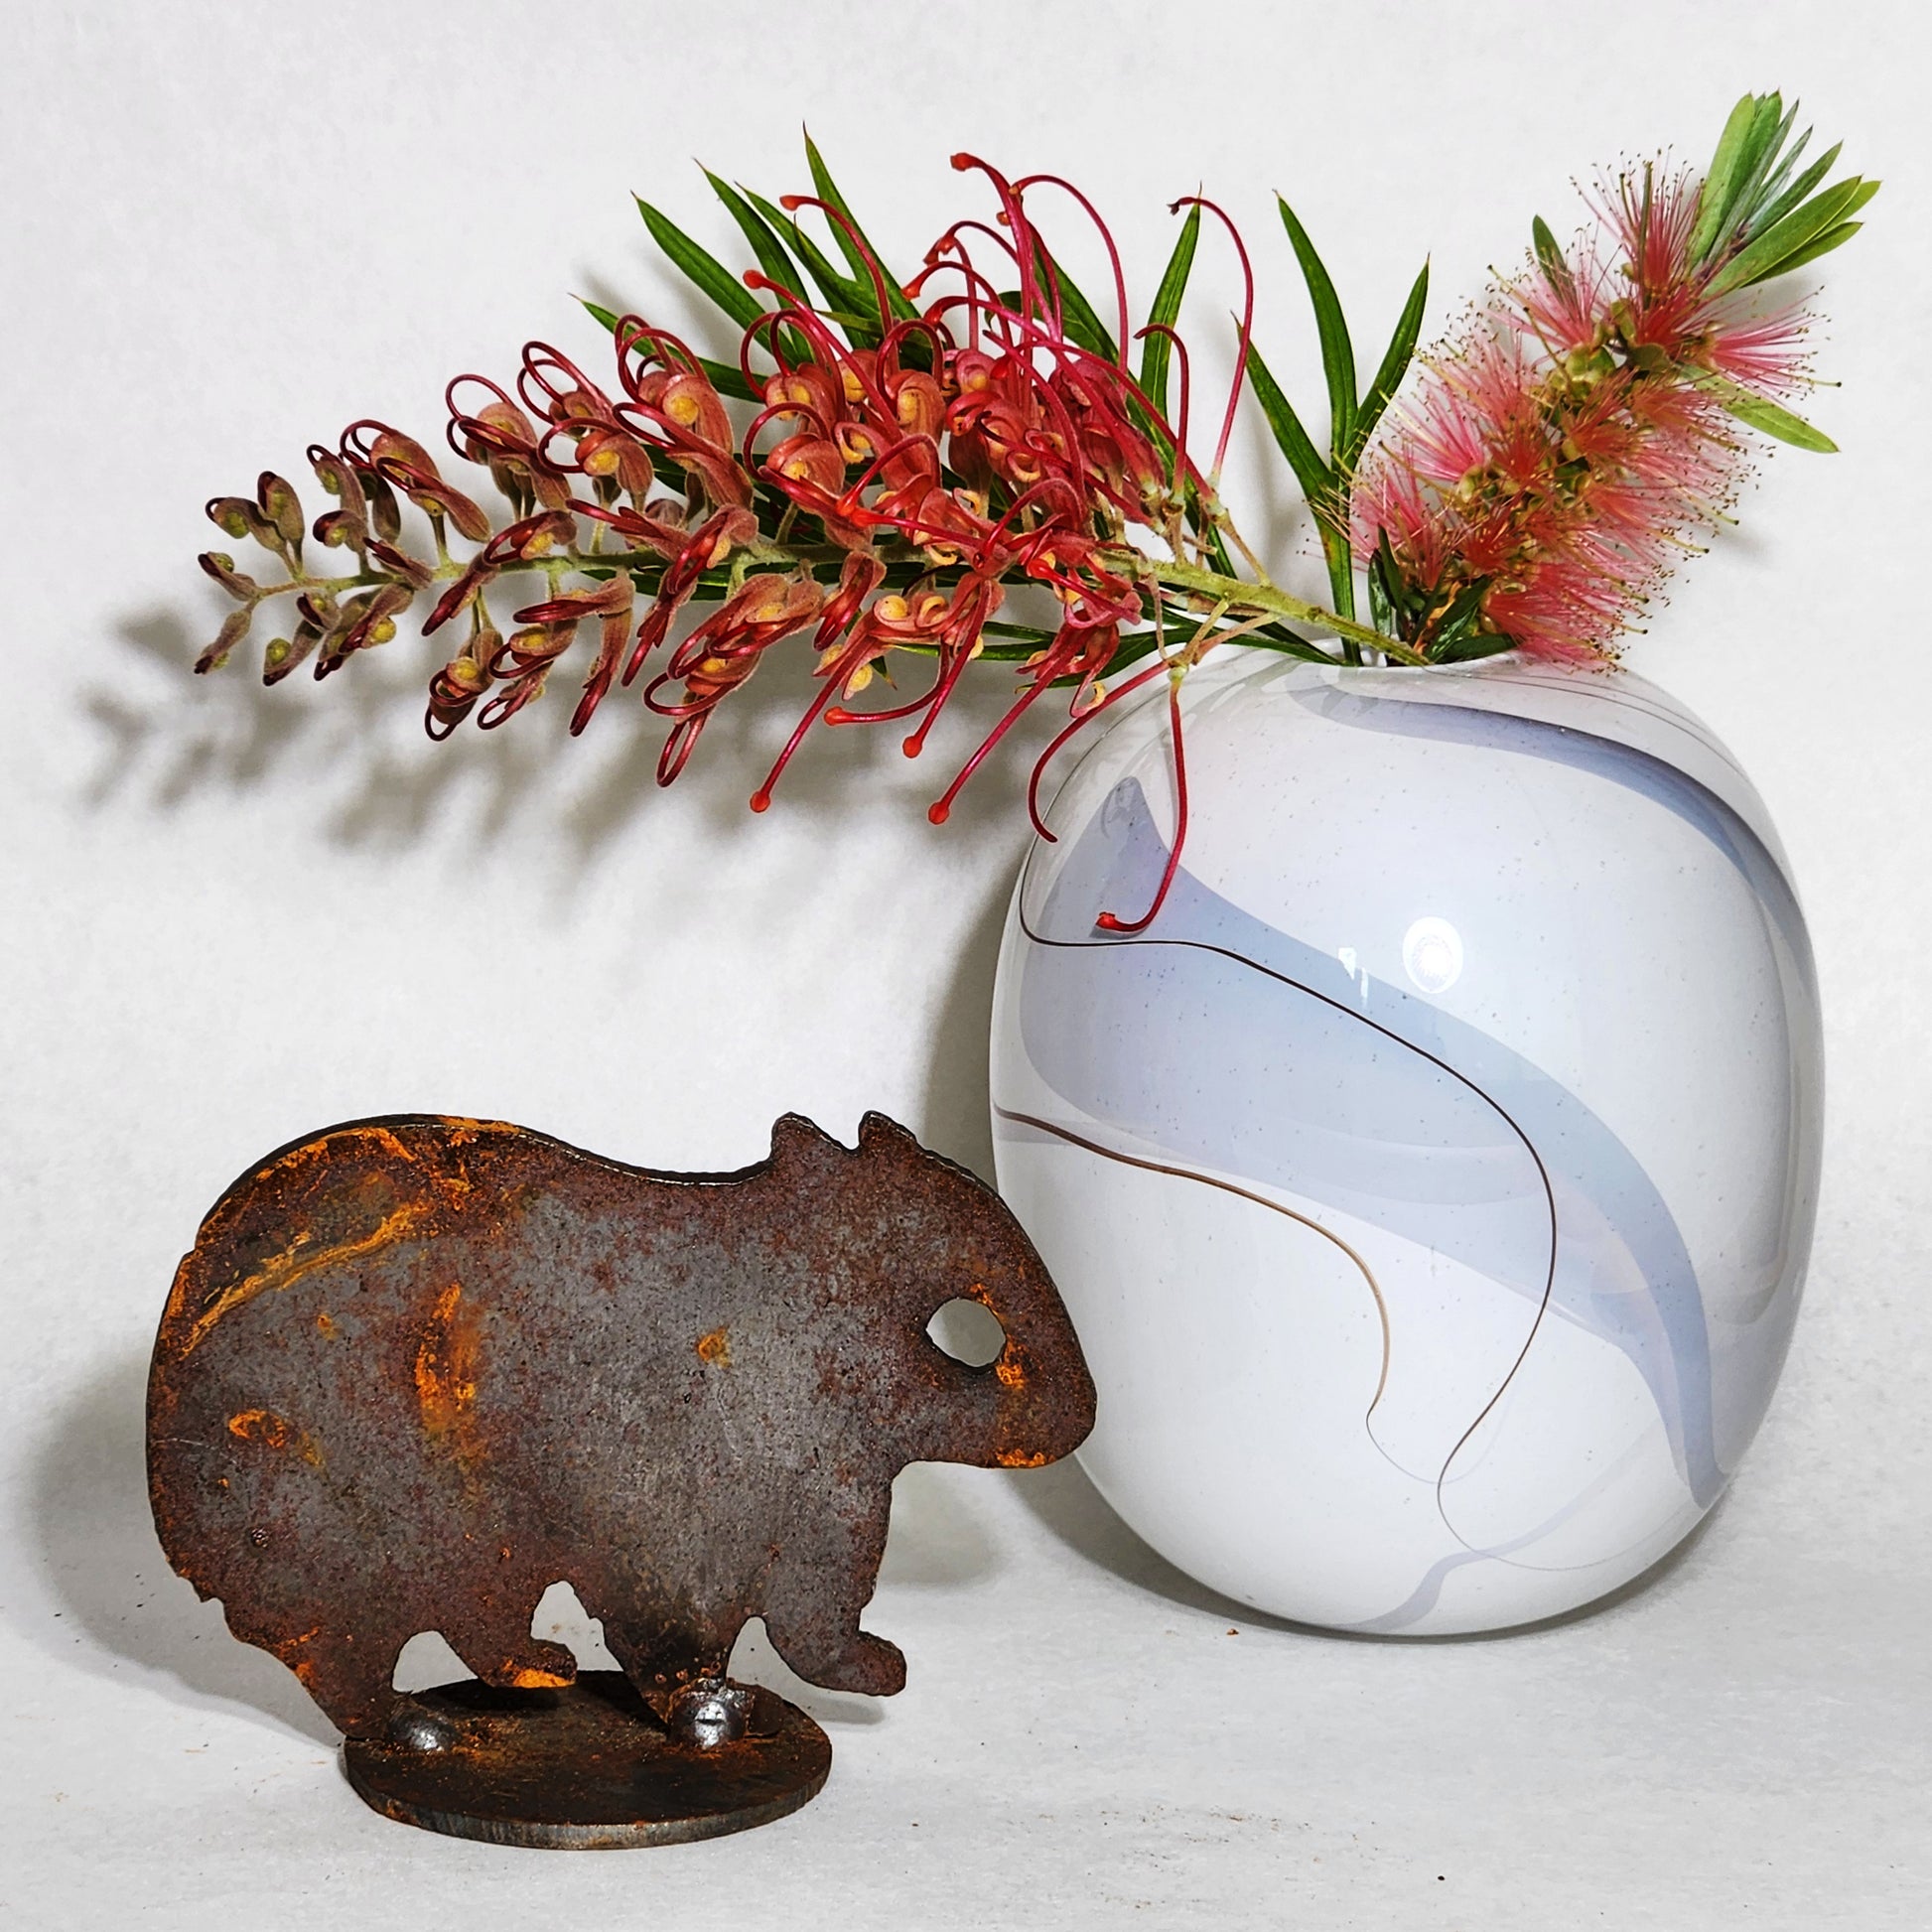 Rustic steel wombat garden ornament from Ninapatina with a vase of native flowers